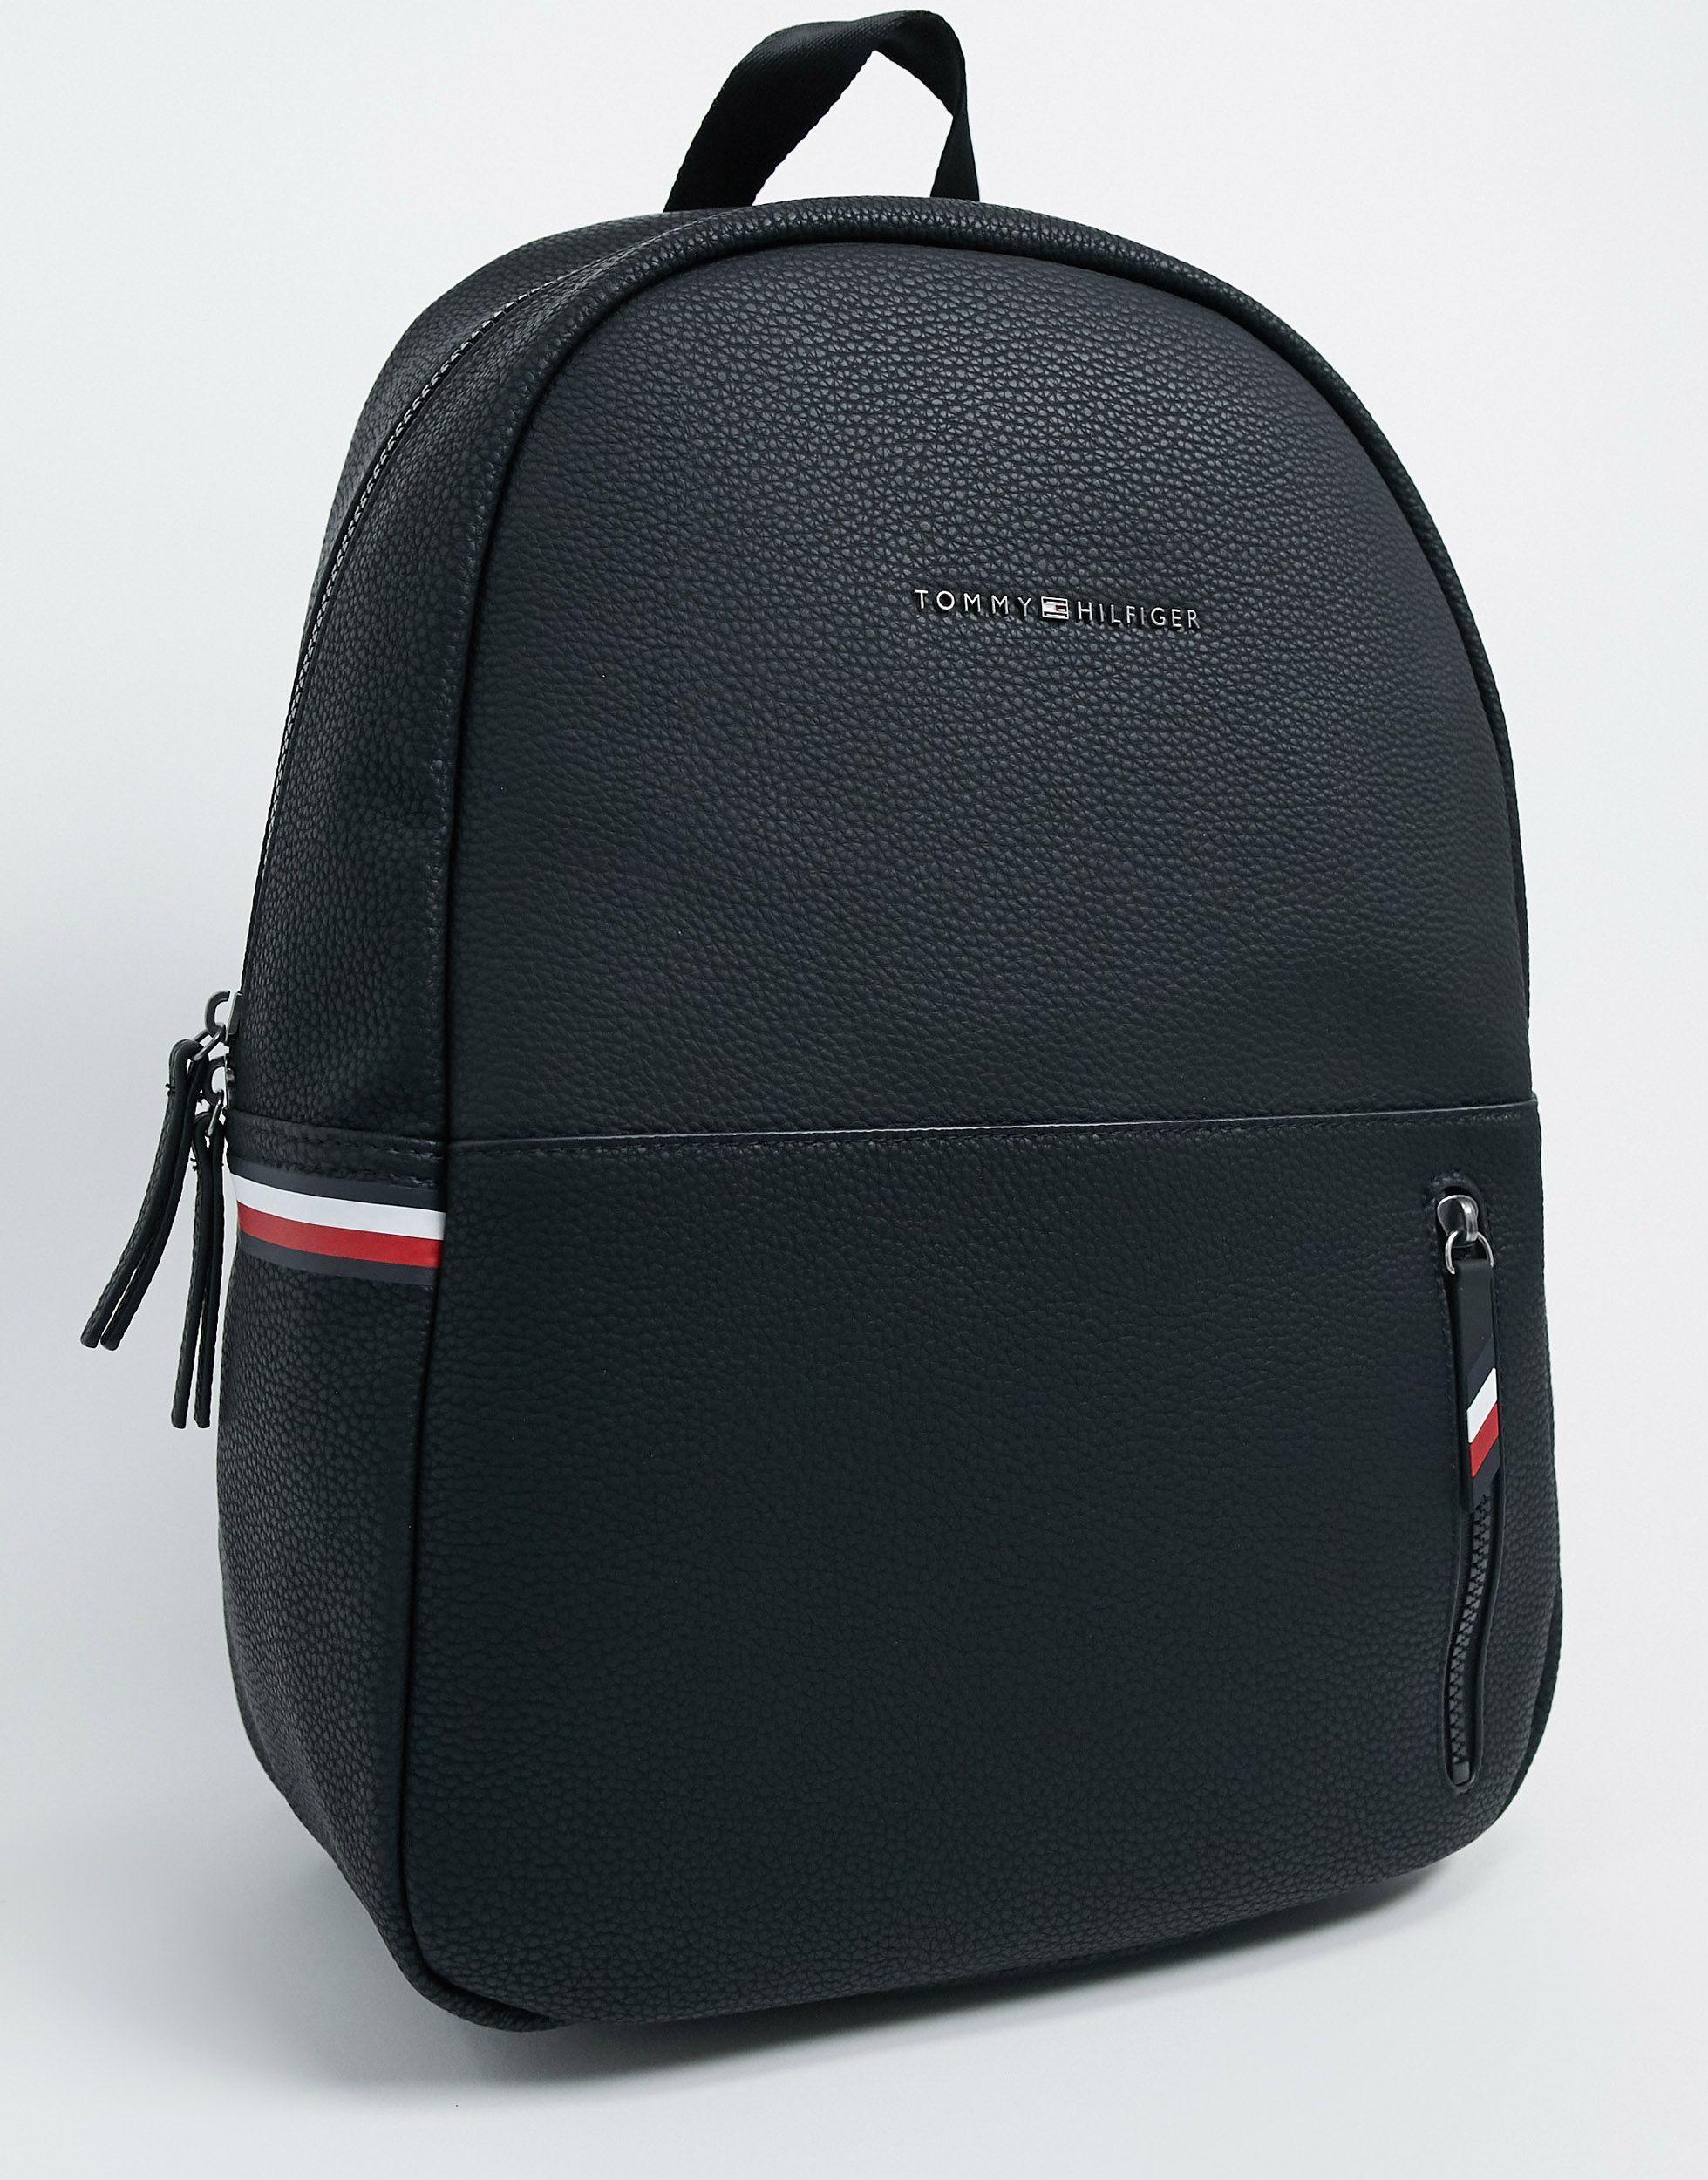 Tommy Hilfiger Asos Exclusive Faux Leather Backpack in Black for Men - Lyst